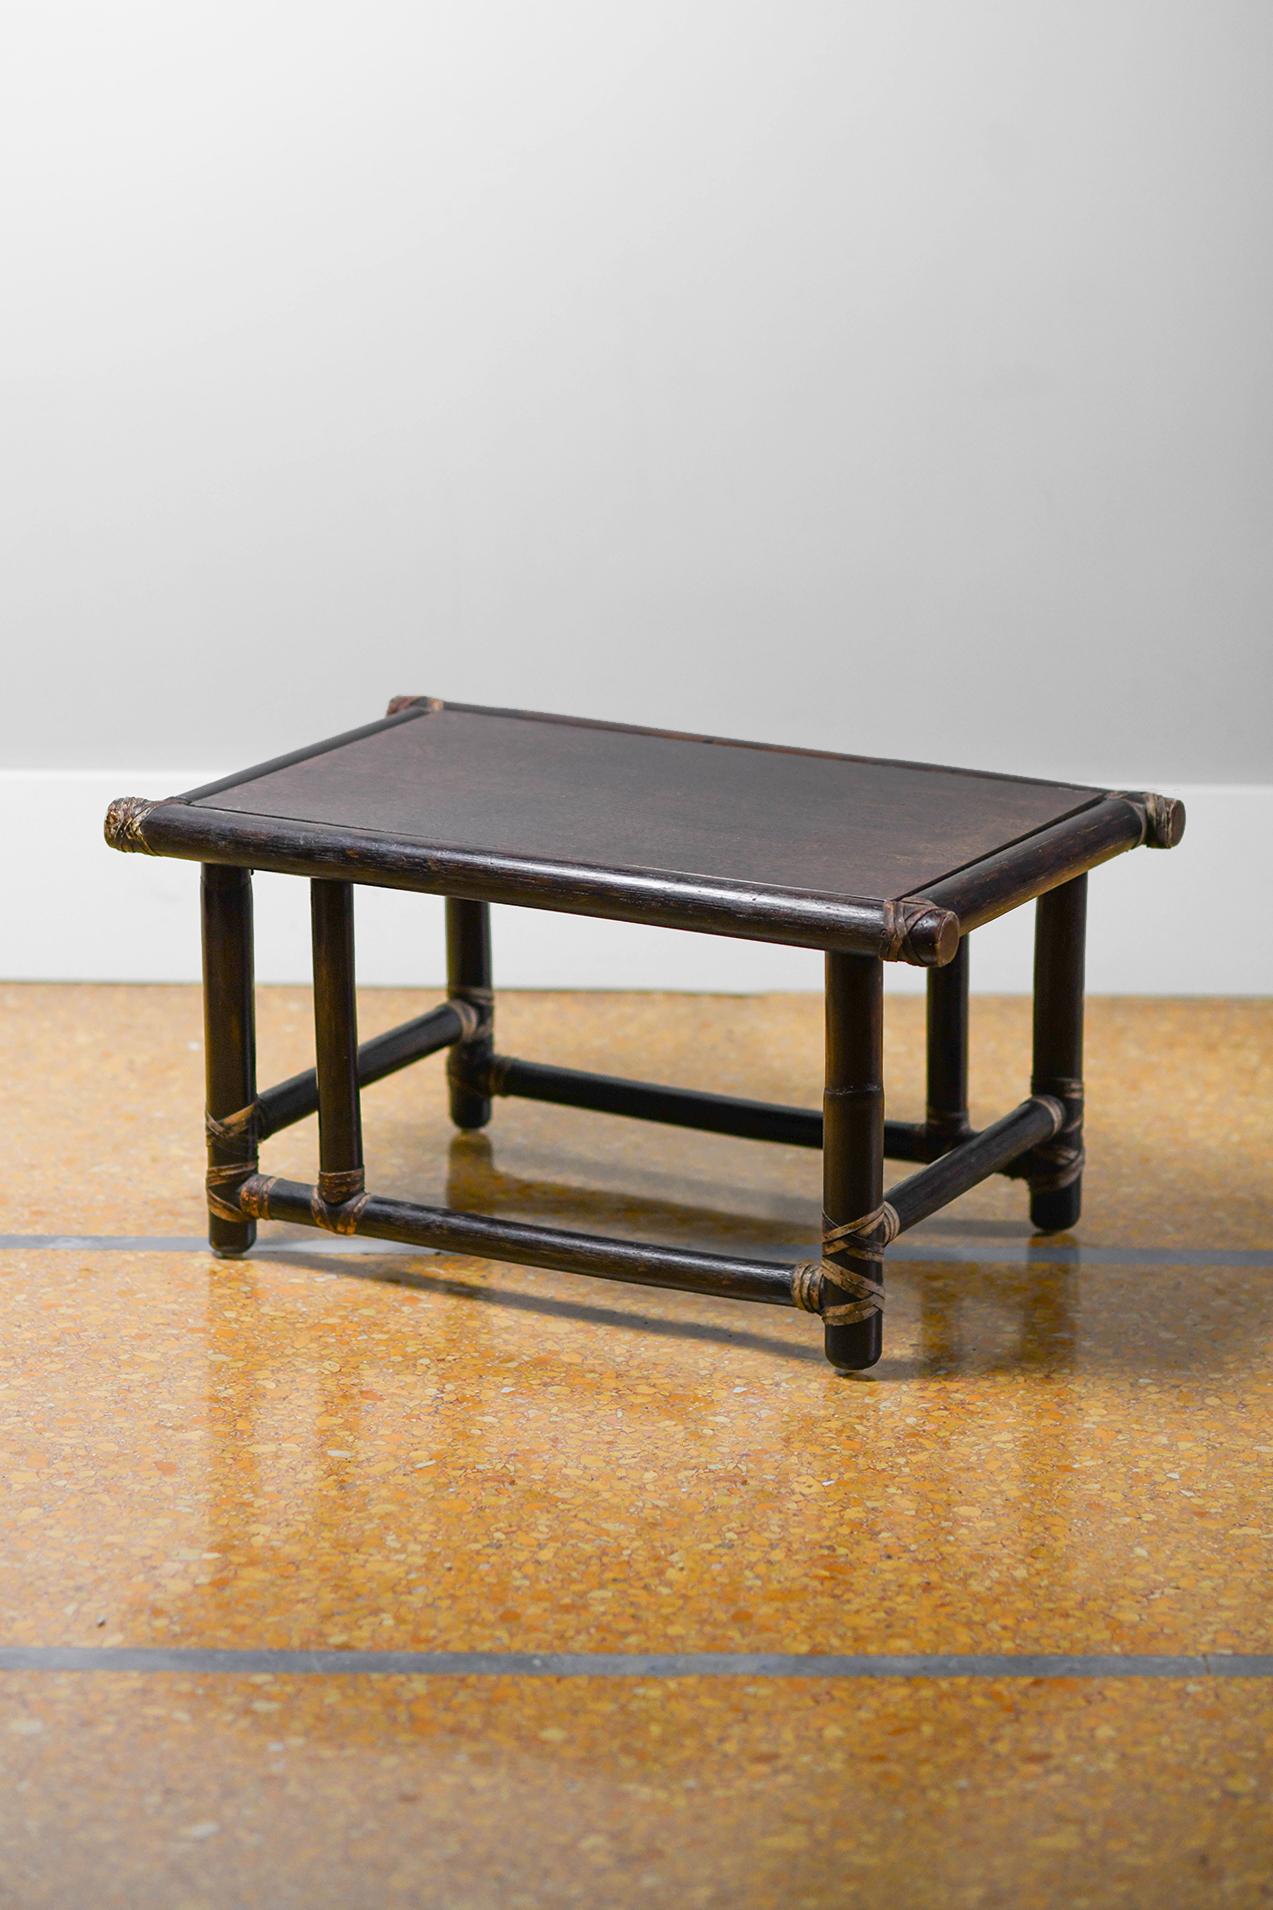 Pair of wooden tables (Dark finish) with leather bindings 
Production: Lyda Levi - McGuire 
Single table dimensions 65 W x 35 H x 43 D cm
Sold as set of 2